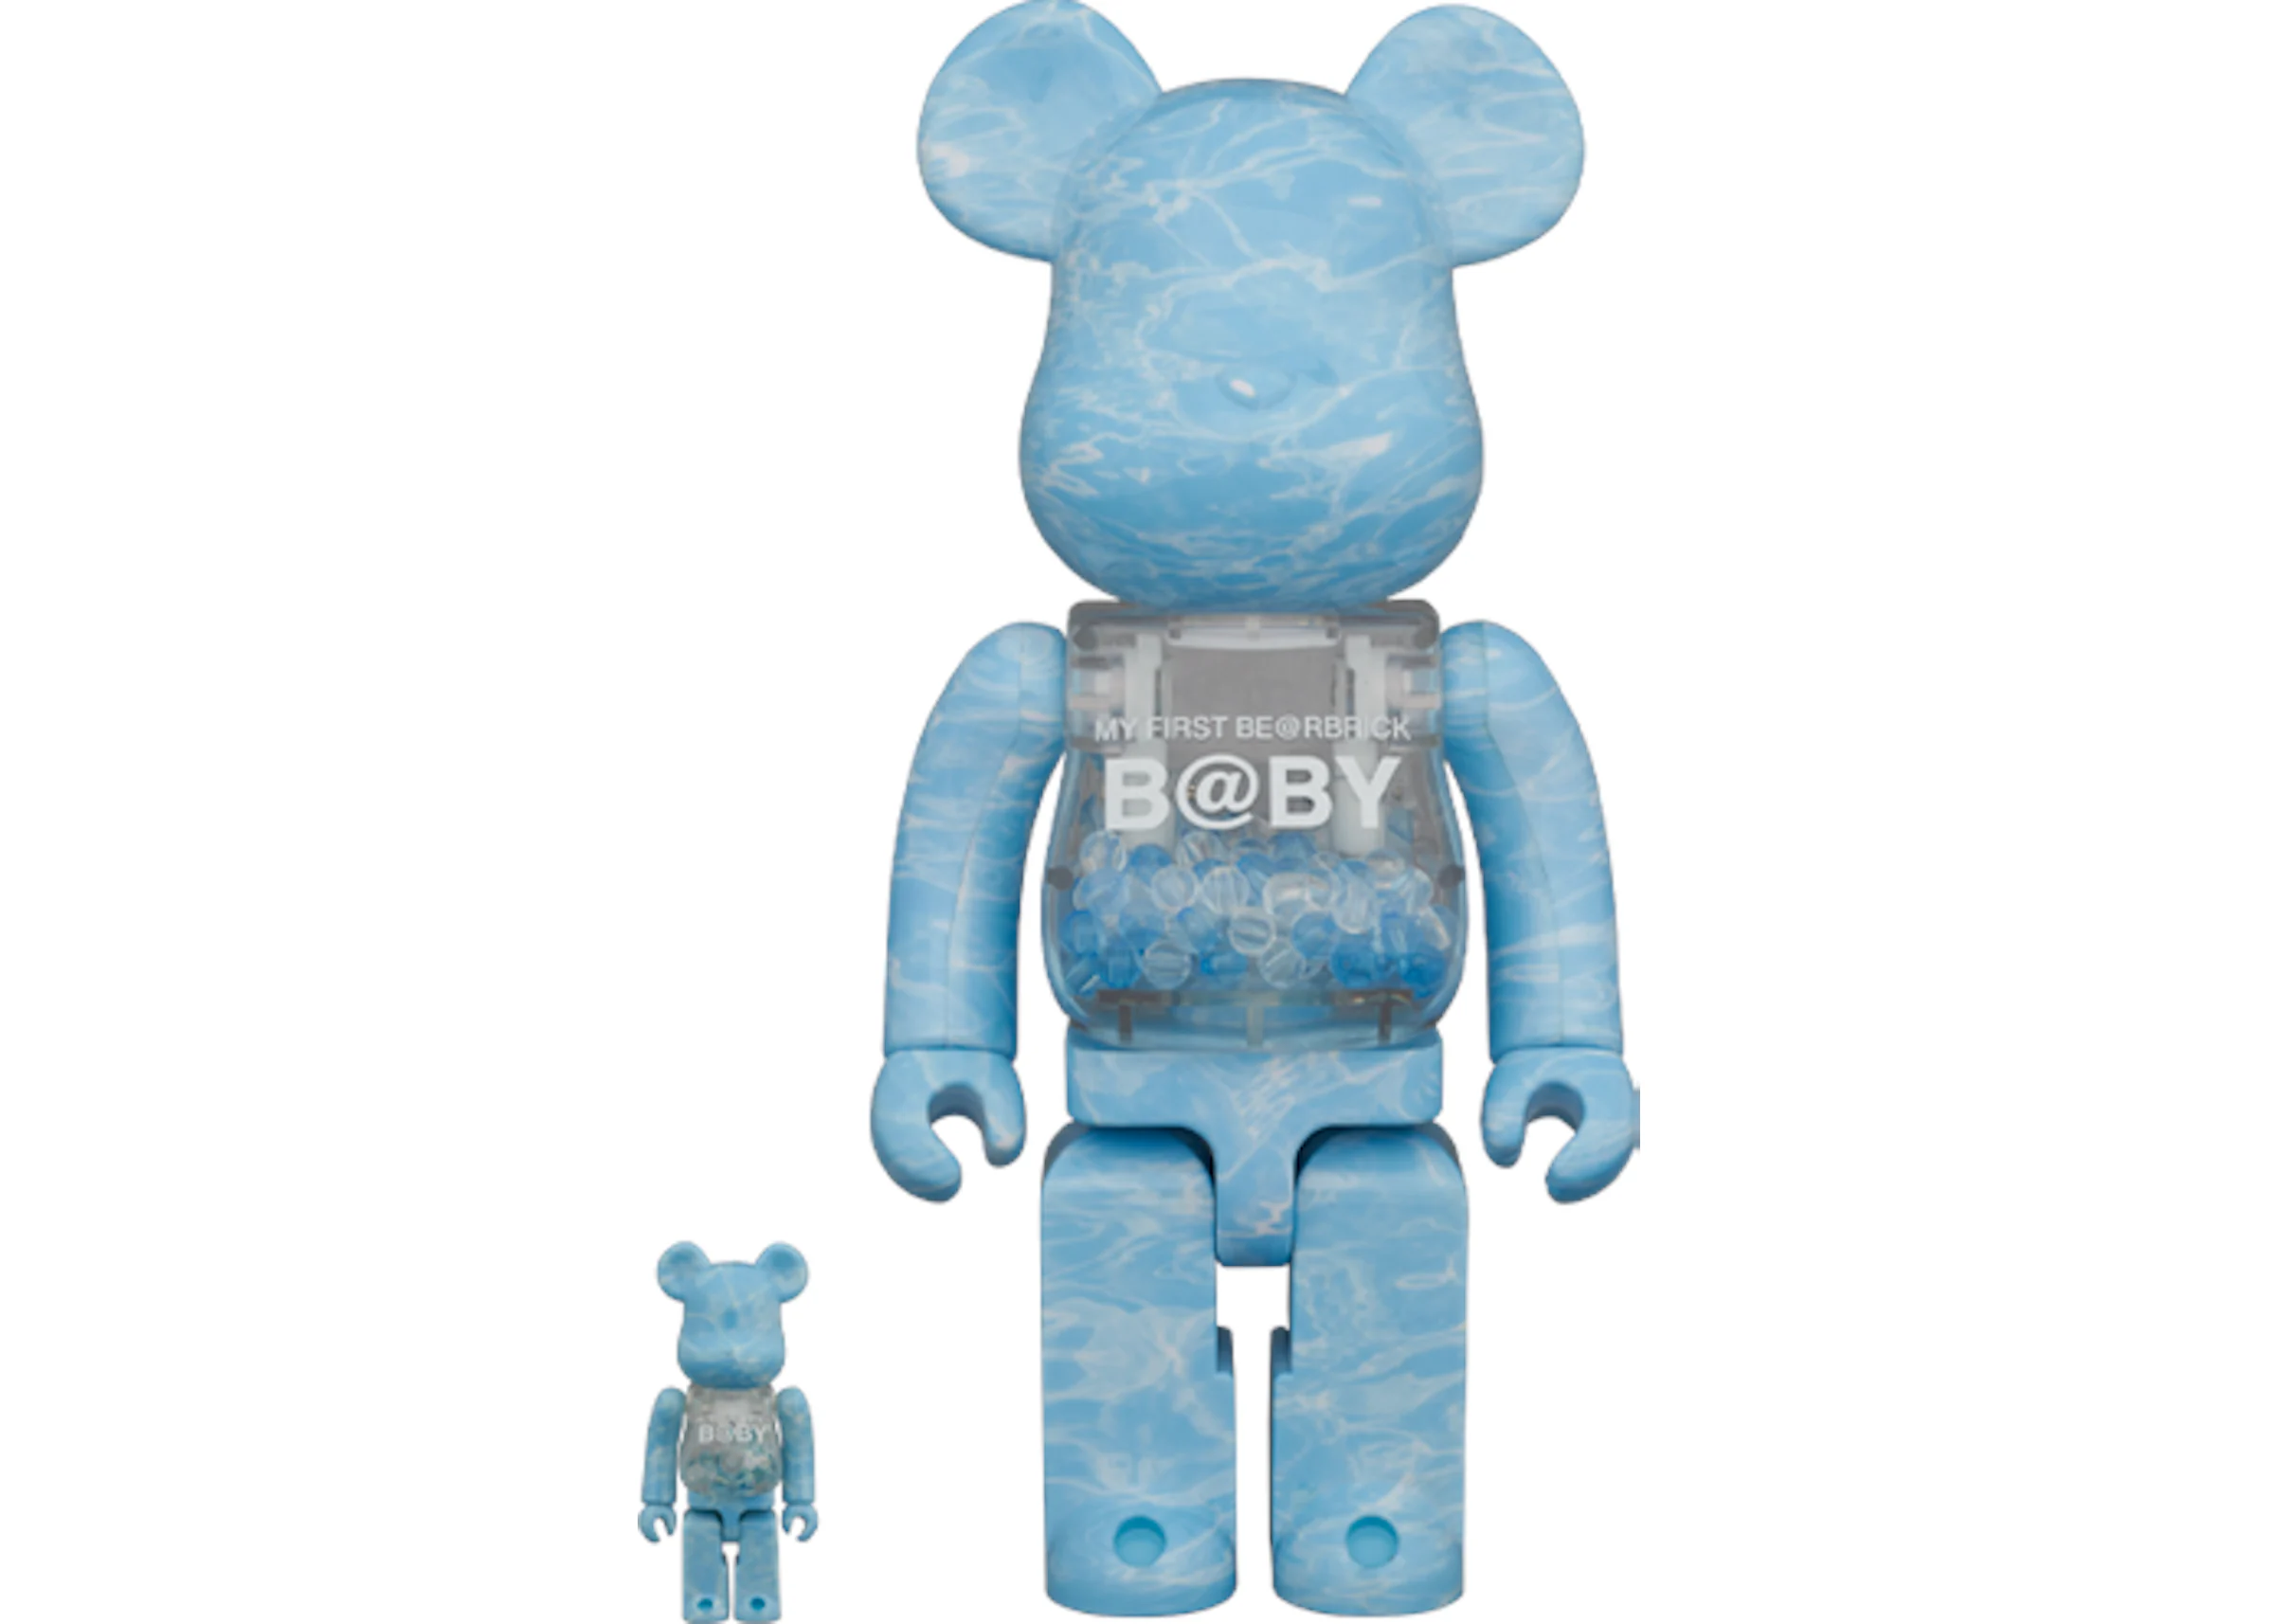 Bearbrick MY FIRST BE @ RBRICK B @ BY WATER CREST Ver